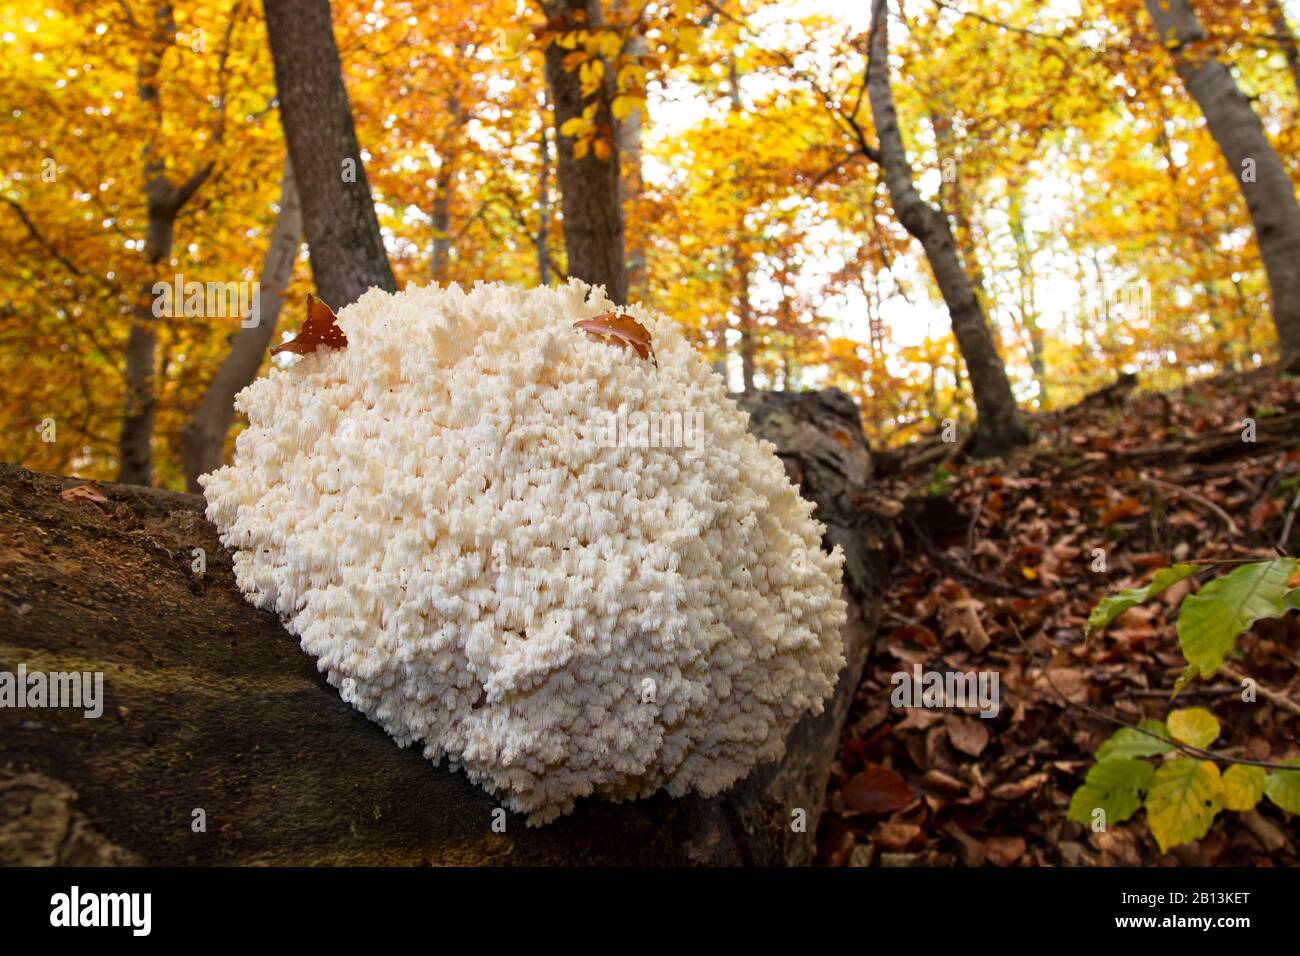 comb tooth mushroom, Coral tooth (Hericium coralloides, Hericium clathroides), single fruiting body on forest floor, Germany, Baden-Wuerttemberg Stock Photo